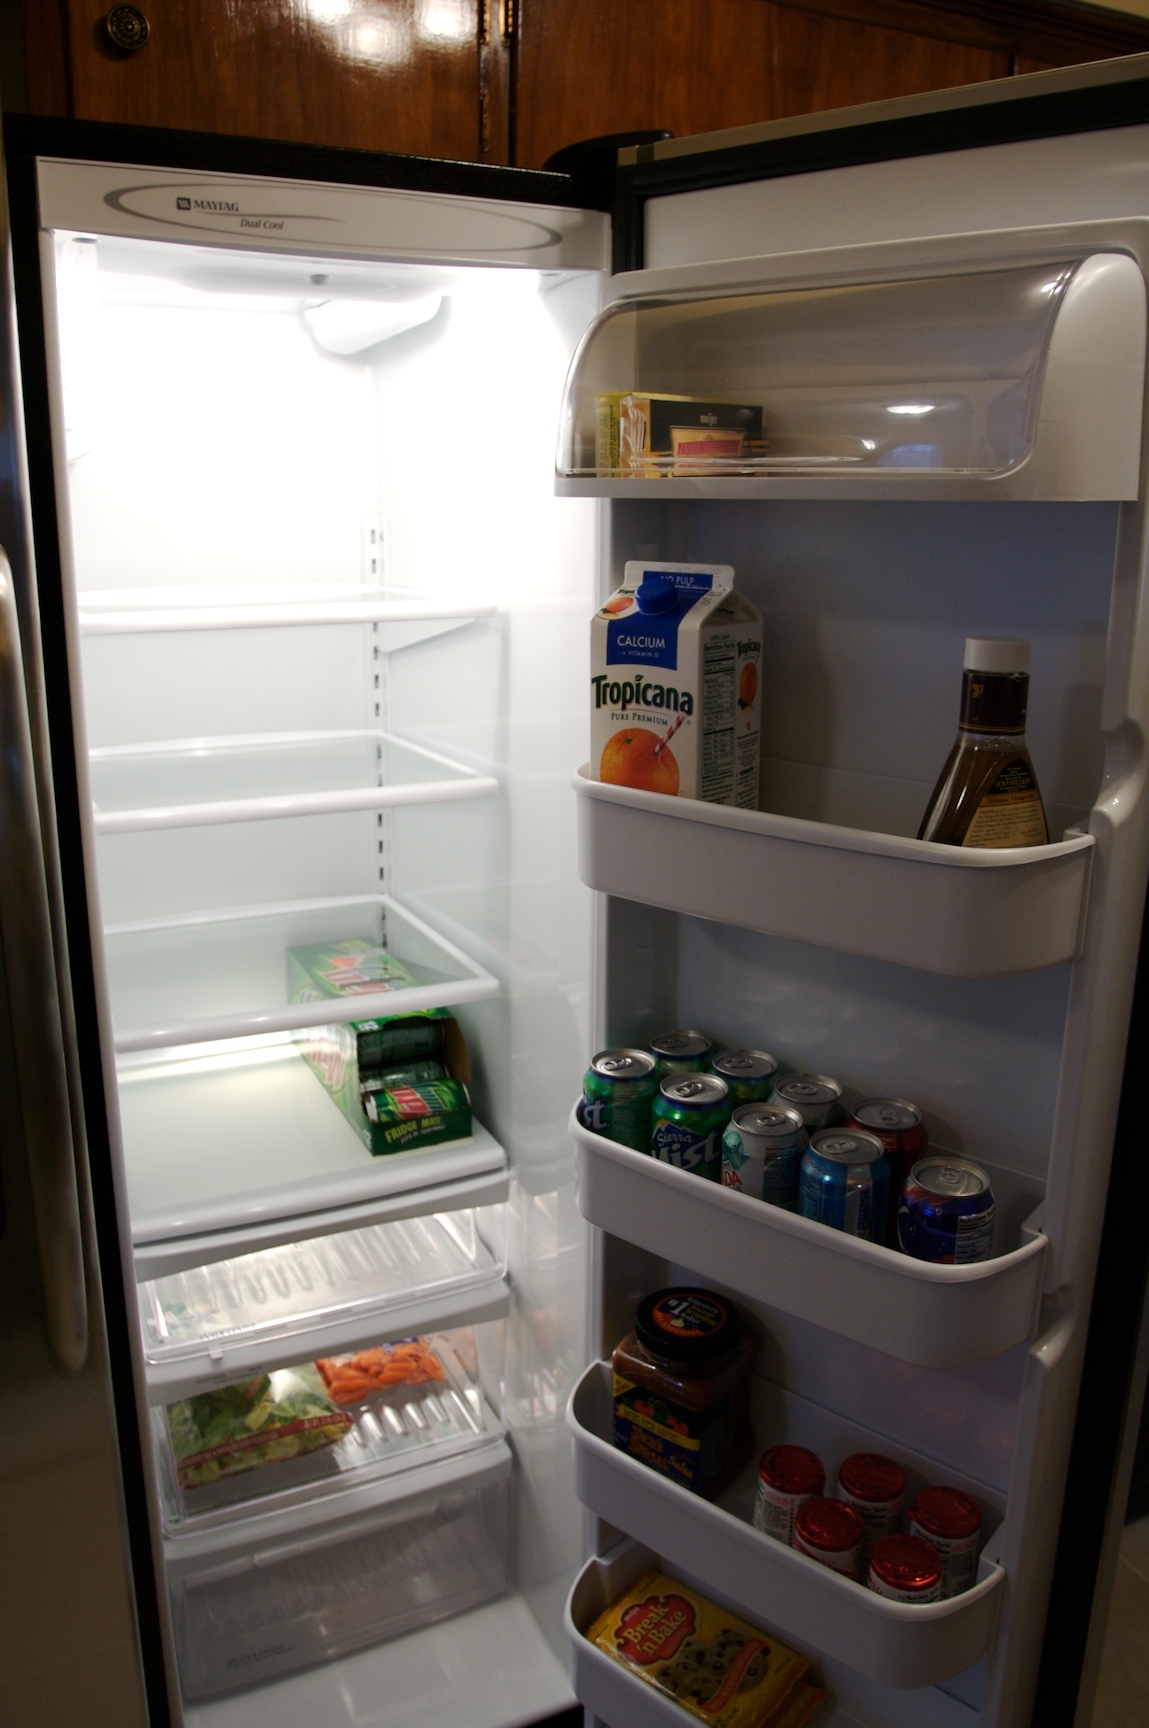 the refrigerator is open to show whats inside